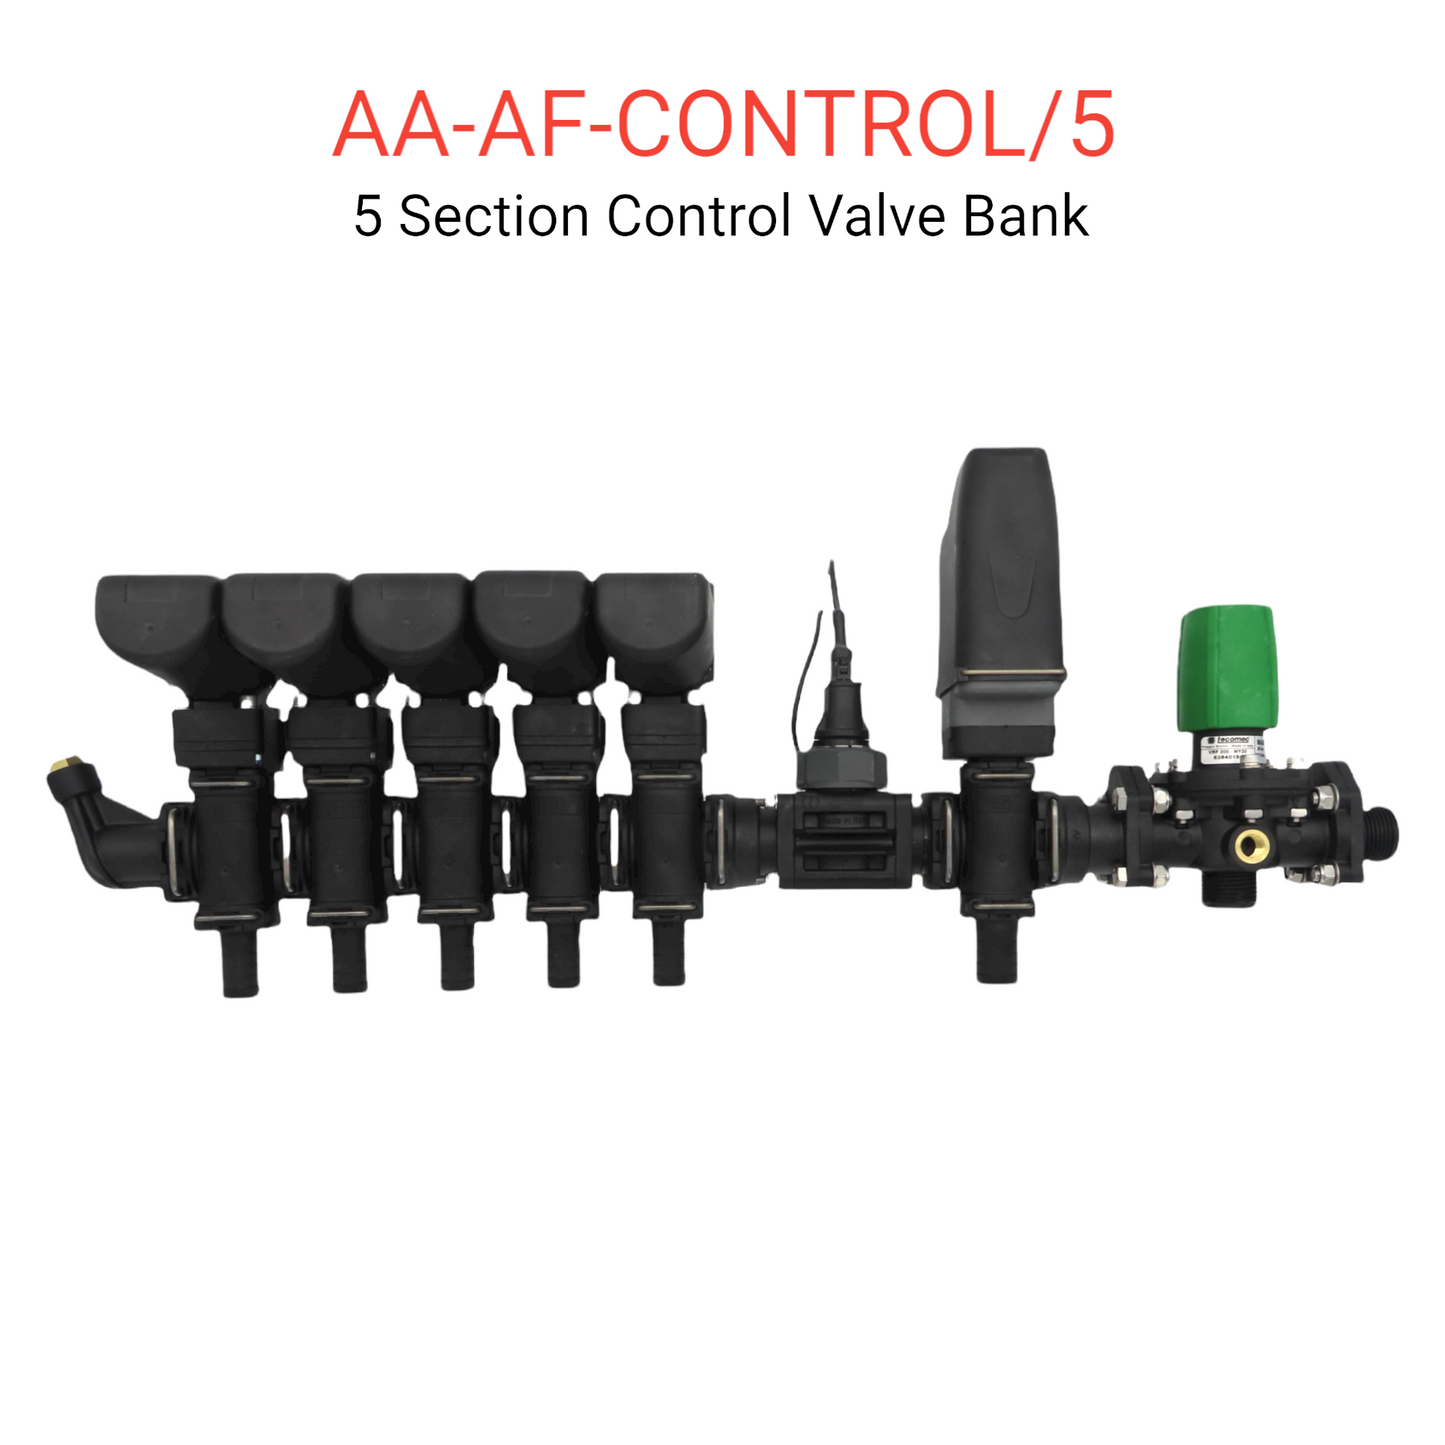 Combo 240 Spray Package - GeoSystem 240 & 5 Section Control Valve Bank